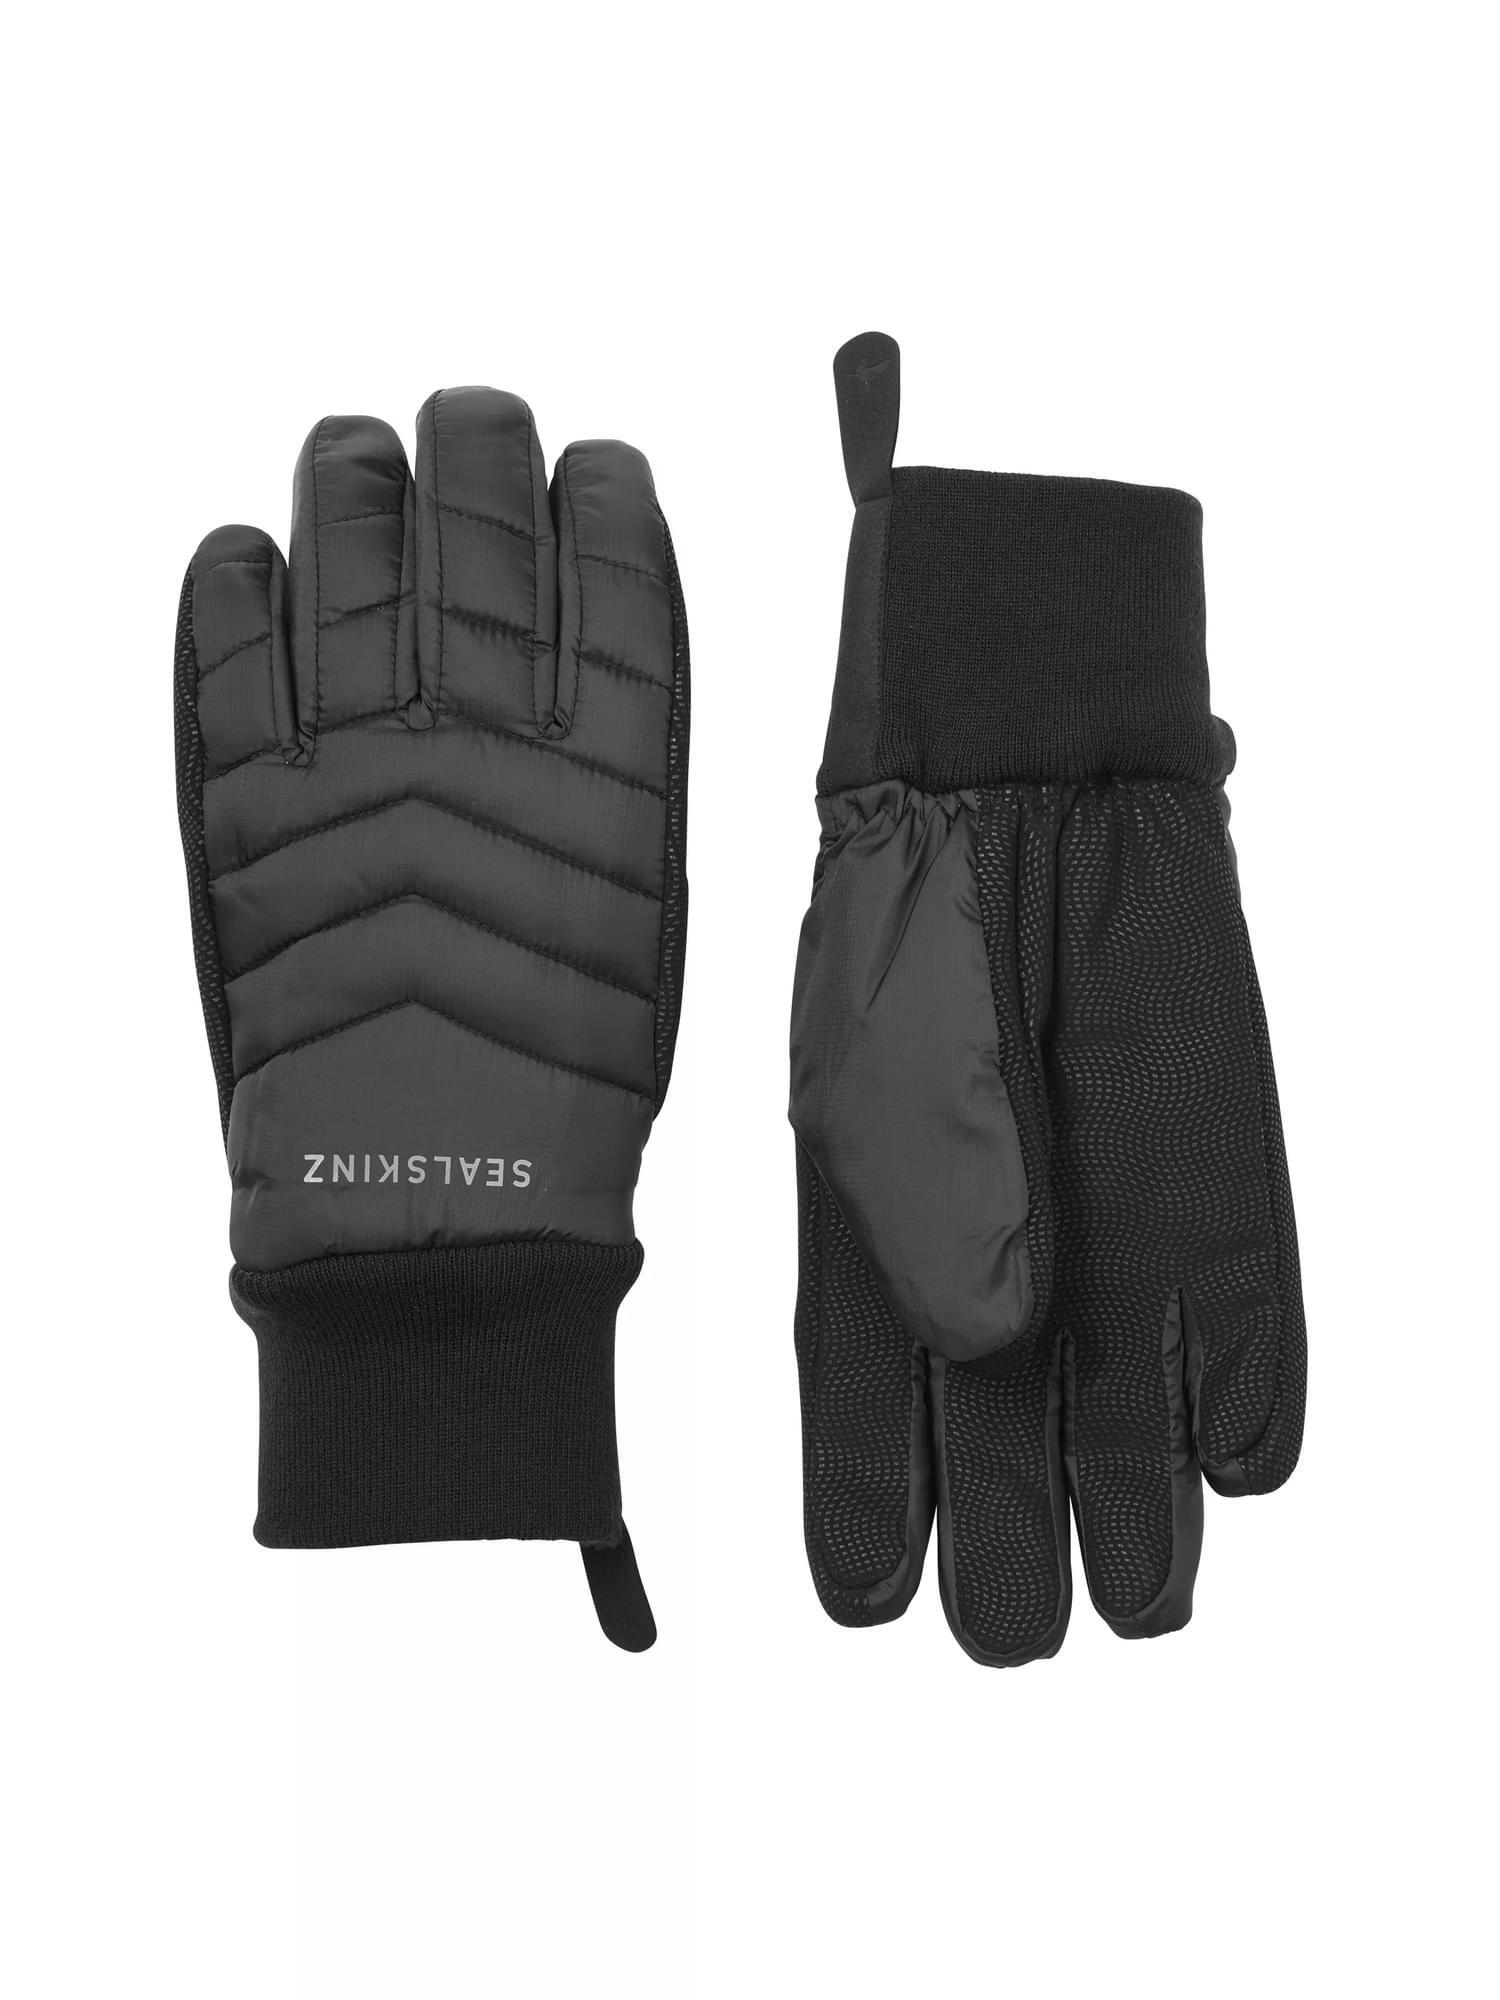 Waterproof All Weather Lightweight Insulated Thermal Gloves 1/3